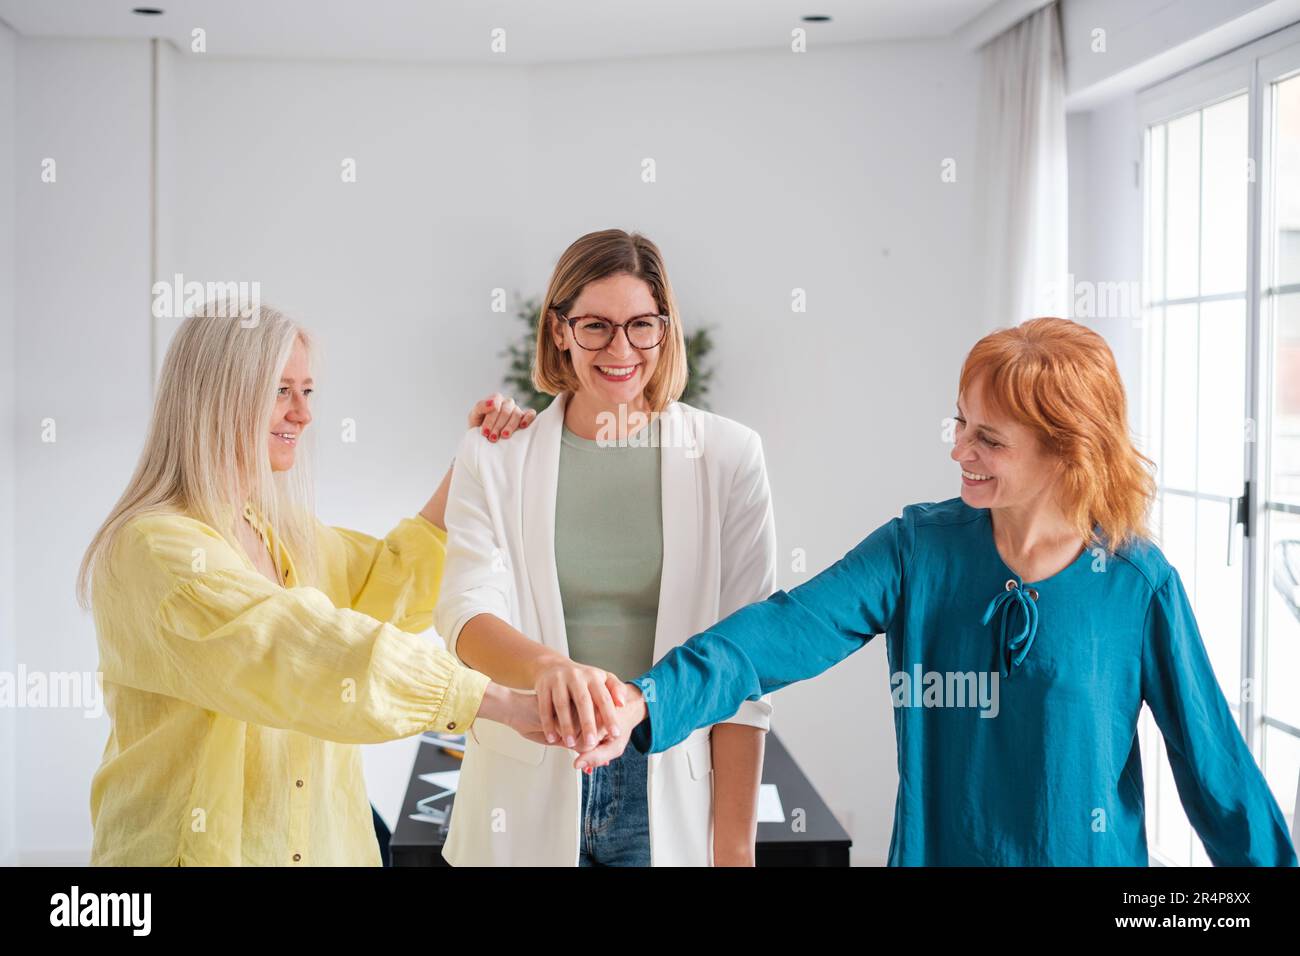 Group of women joining hands and forces to generate a powerful company. Concept: business, start up, empowered women Stock Photo